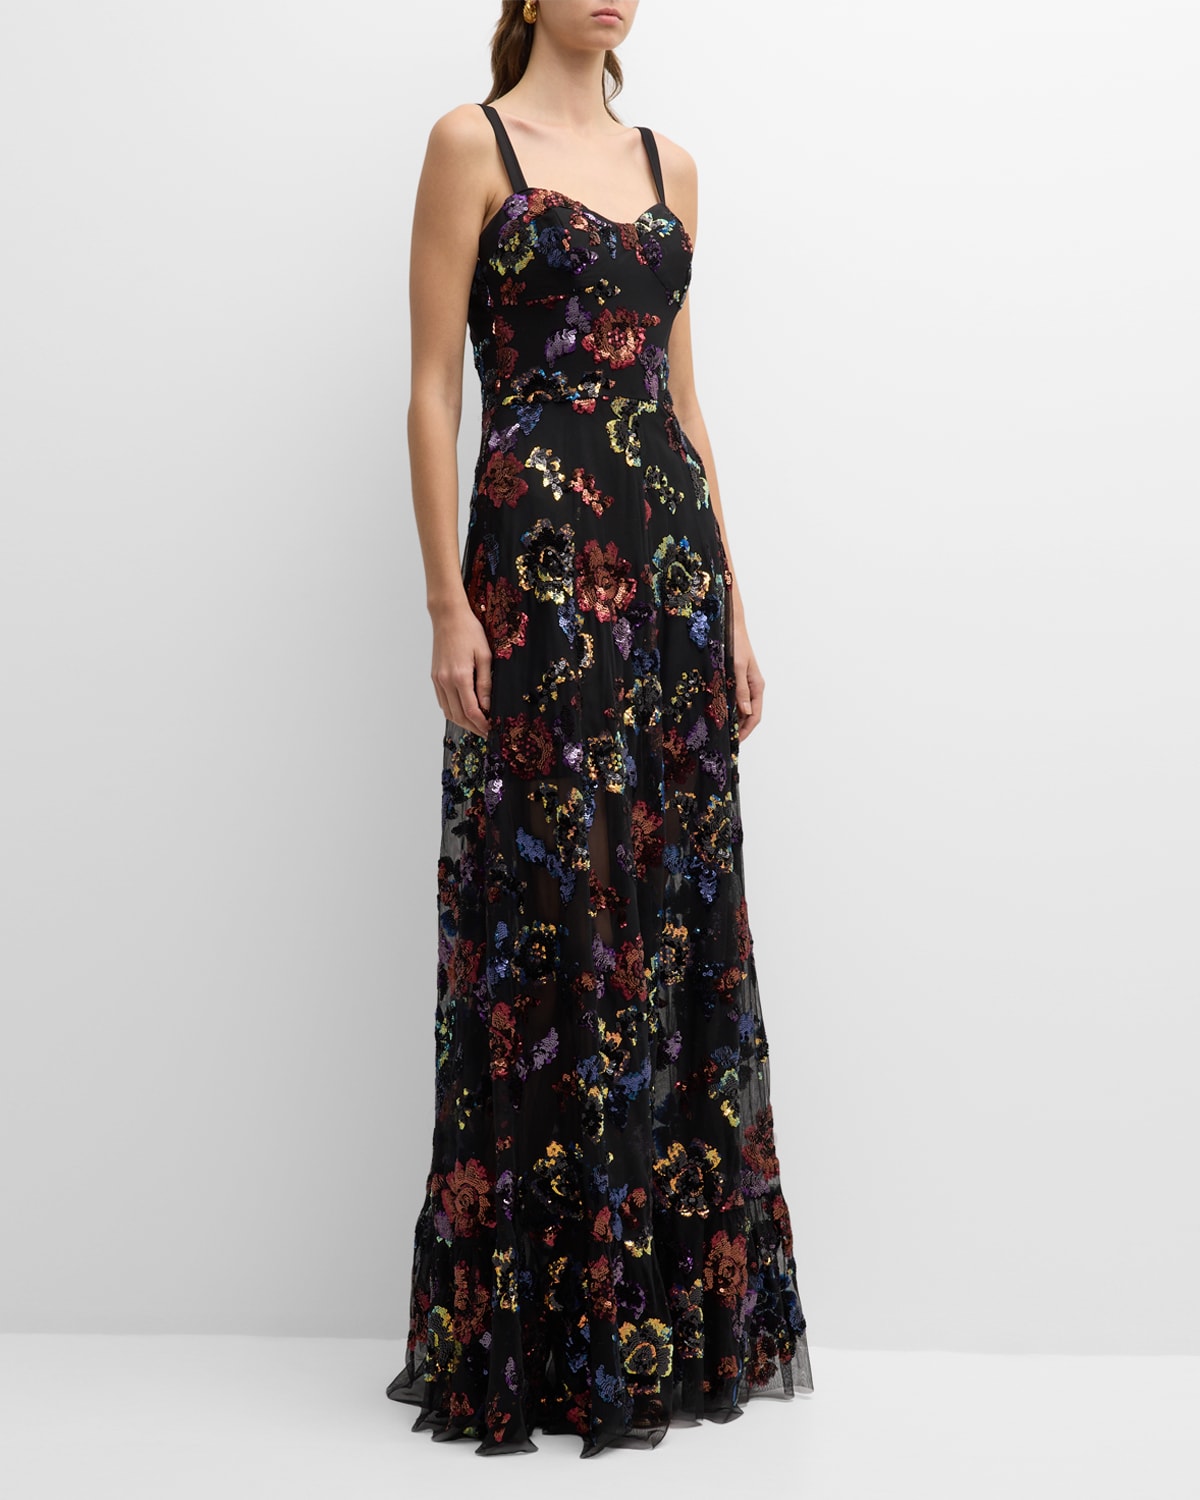 Dress The Population Black Label Anabel Floral Sequin Sweetheart Gown In Black Multi